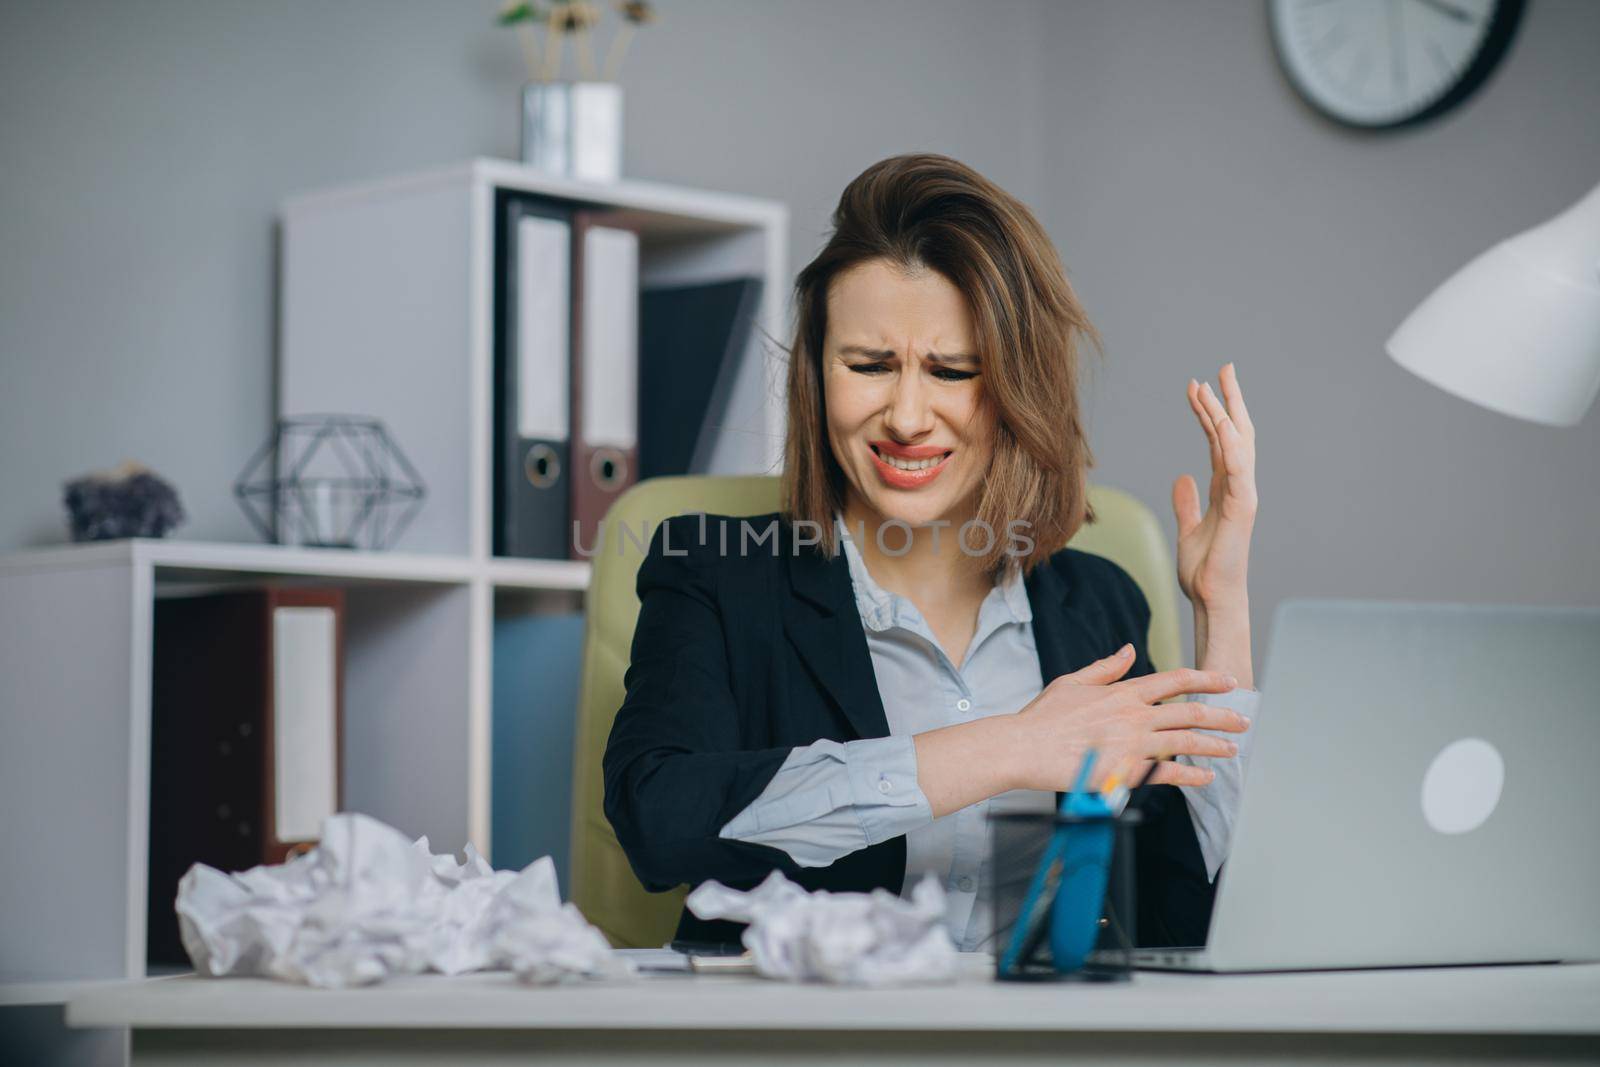 Stressed businesswoman annoyed using stuck laptop, angry woman mad about computer problem frustrated with data loss, online mistake, software error or system failure by uflypro